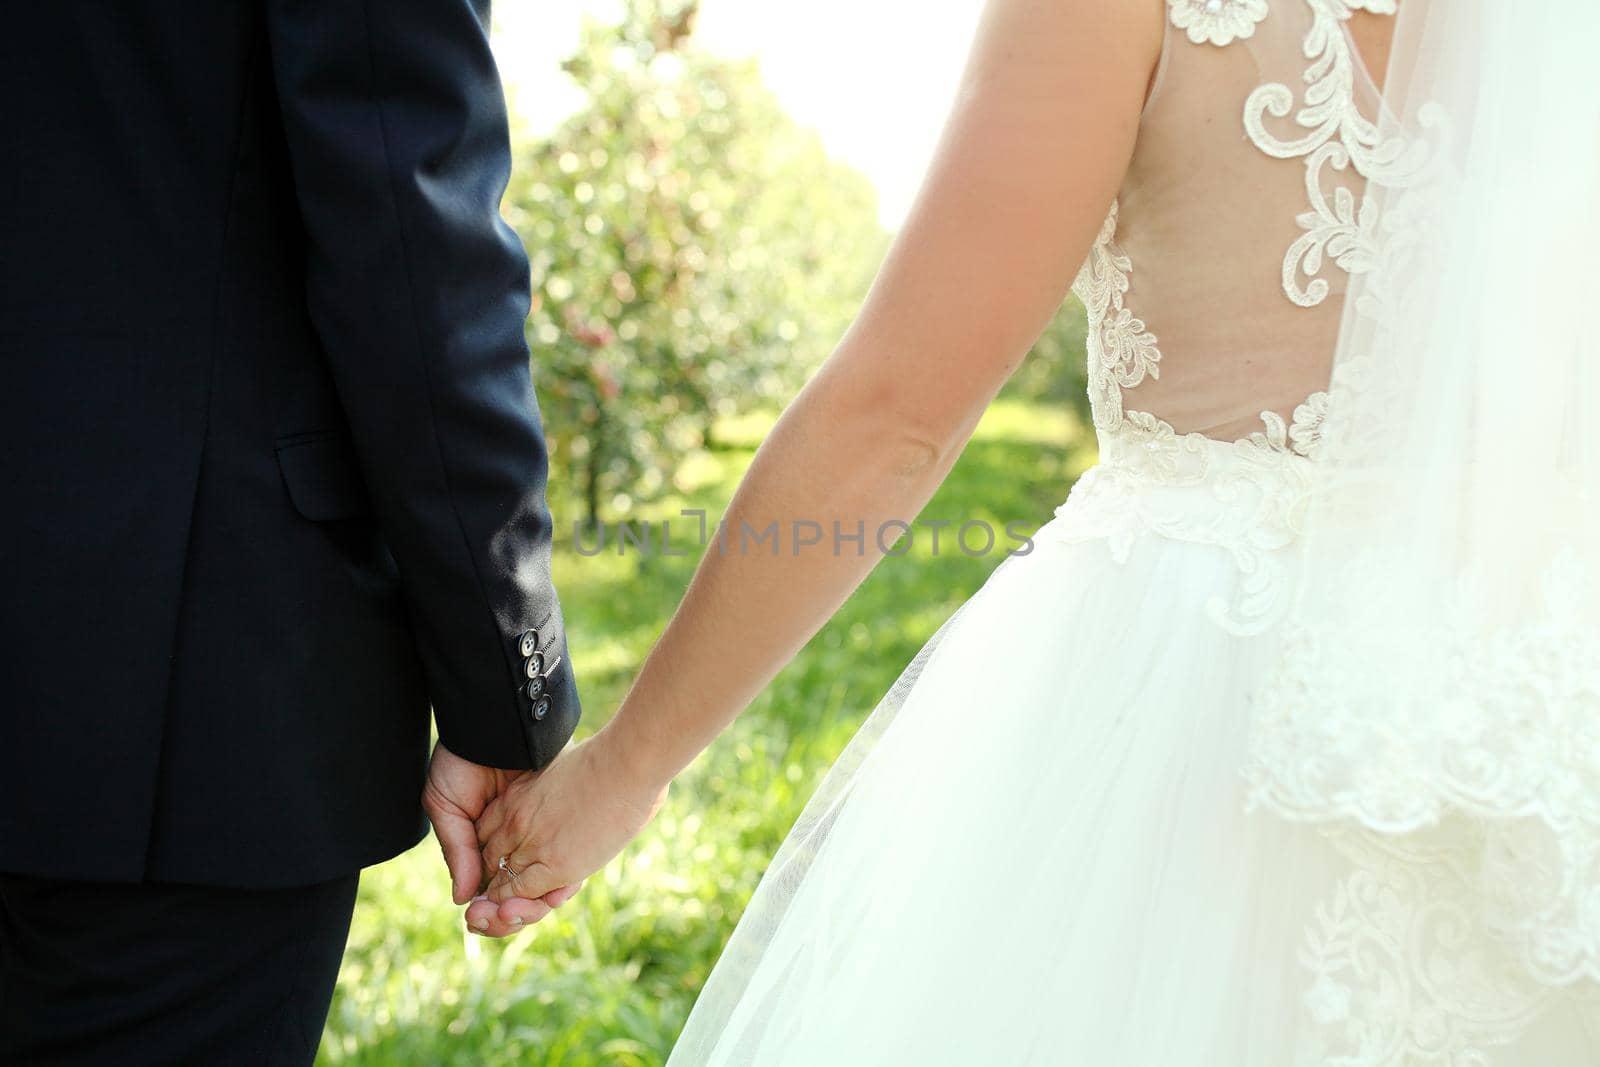 Back view of bride in white dress and groom in suit holding each others hands outdoors